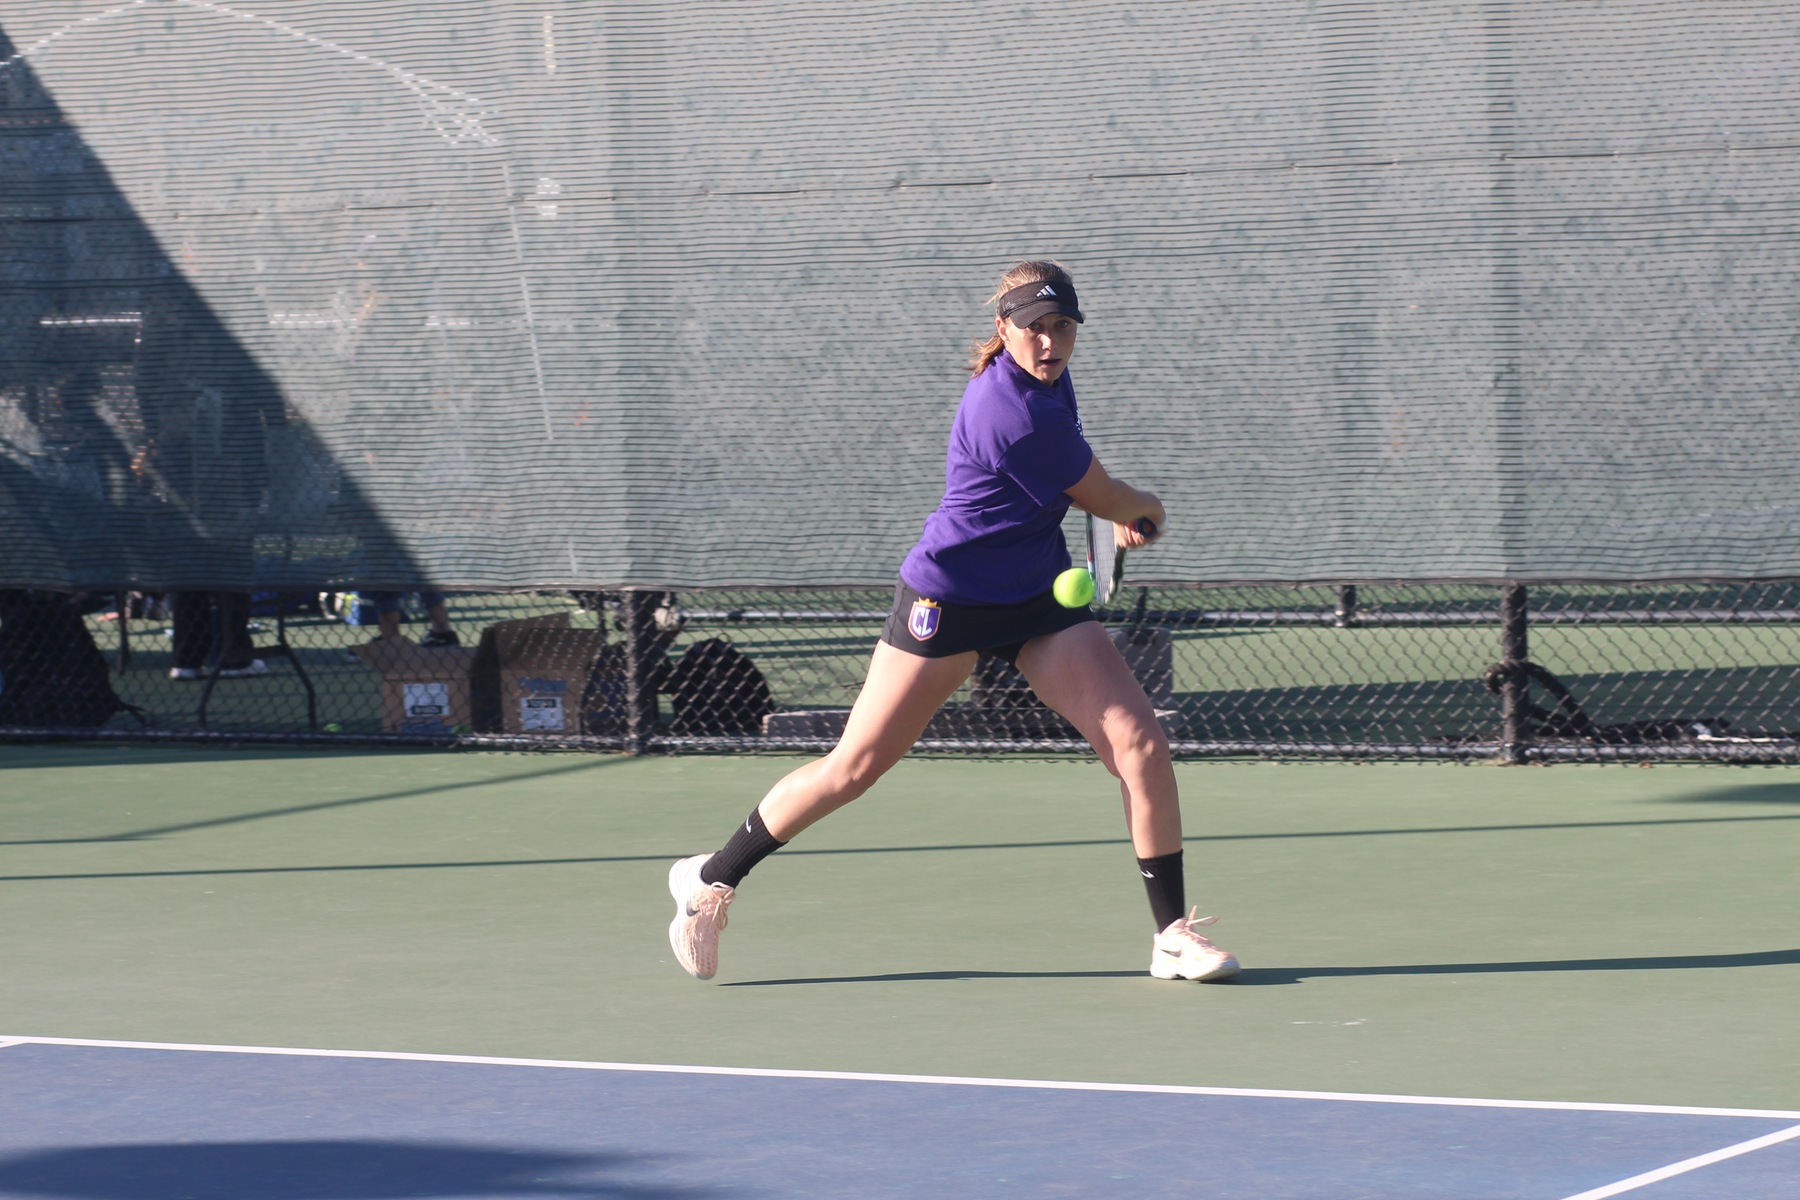 Regals Beat UCSC for First Win of Season